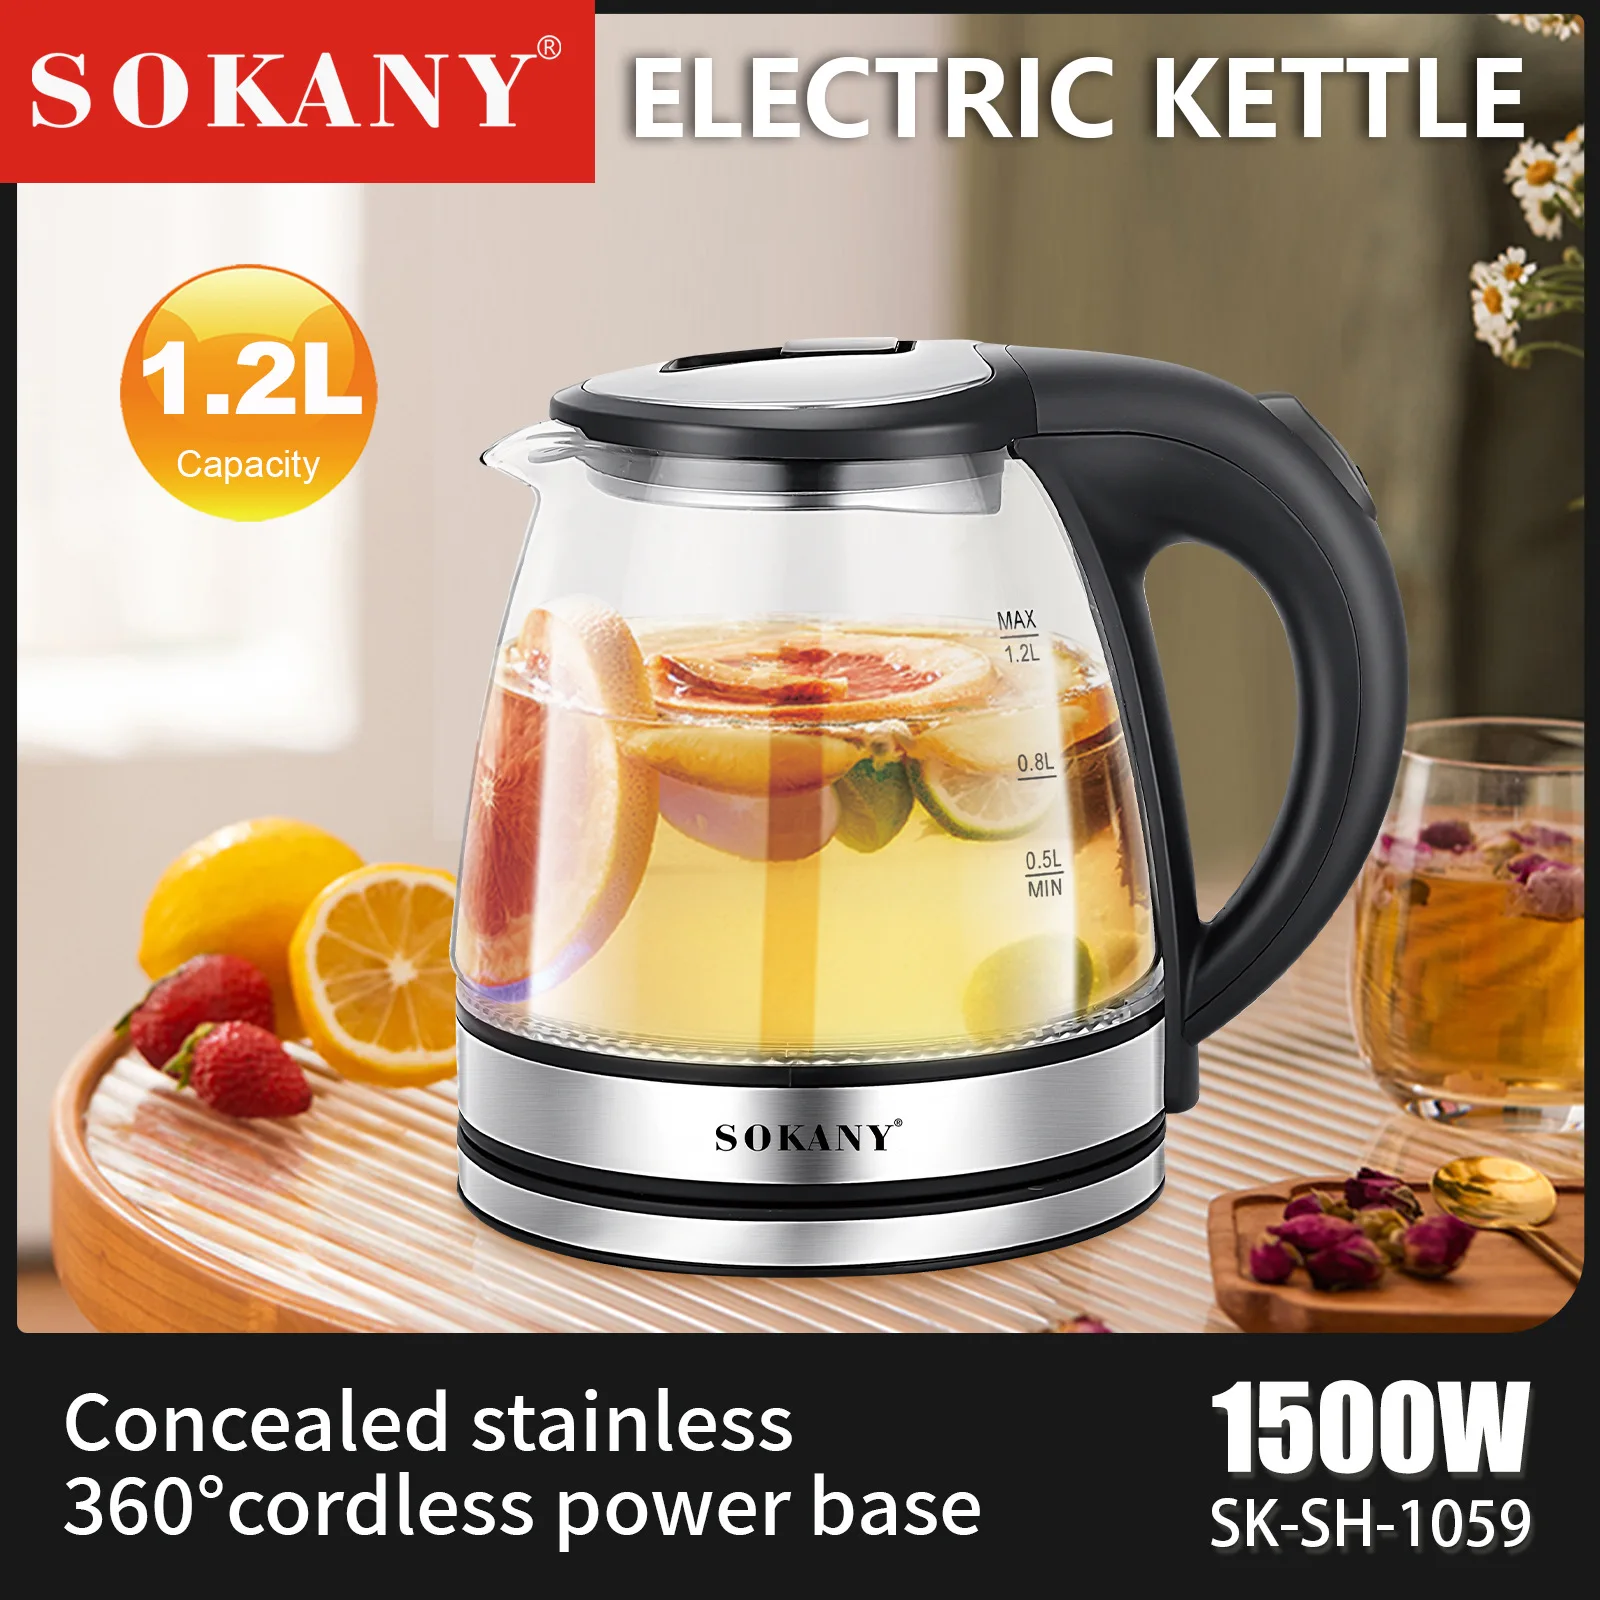 

SOKANY 1.2L Mini Electric Kettle Tea Coffee Stainless Steel 1500W Portable Travel Water Boiler Pot for Hotel Family Trip